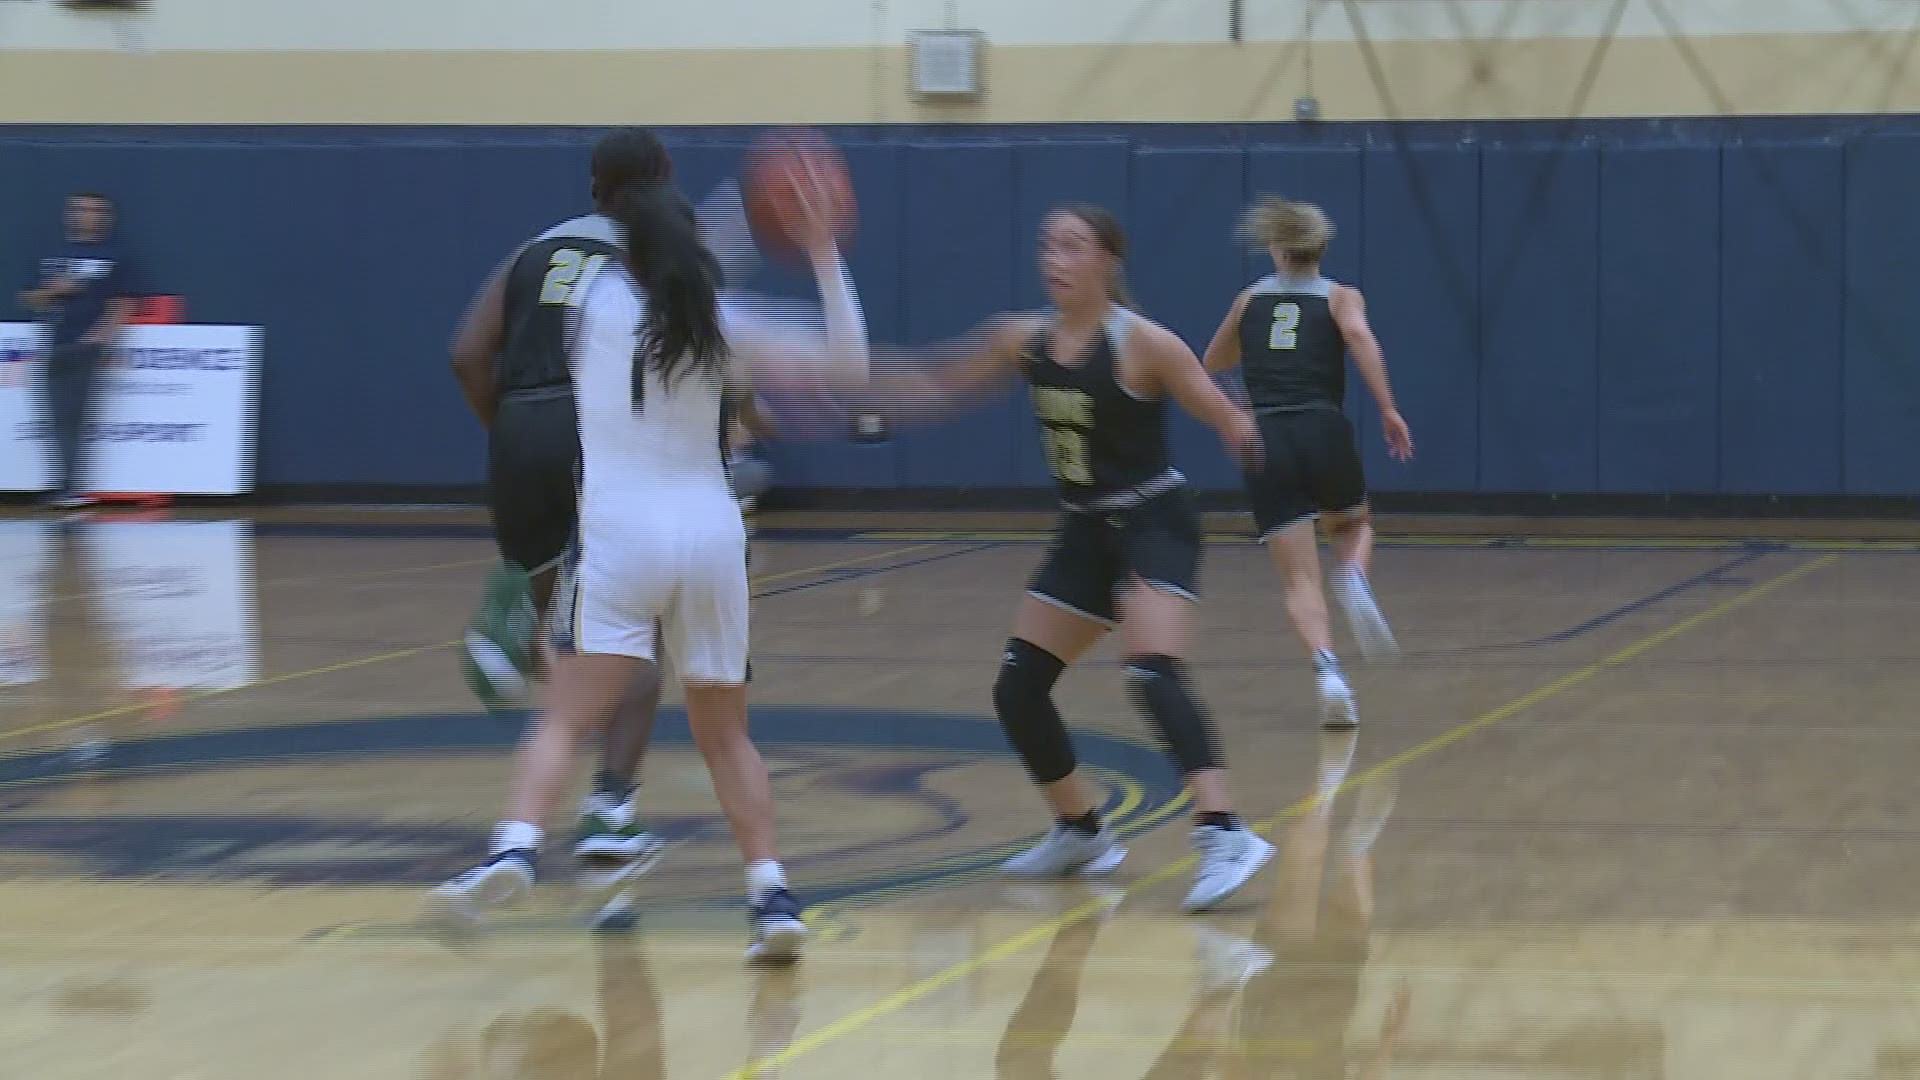 Highlights of No. 4 West Linn's 46-42 win over Canby on Jan. 24, 2020. Highlights are part of KGW's Friday Night Hoops with Orlando Sanchez.